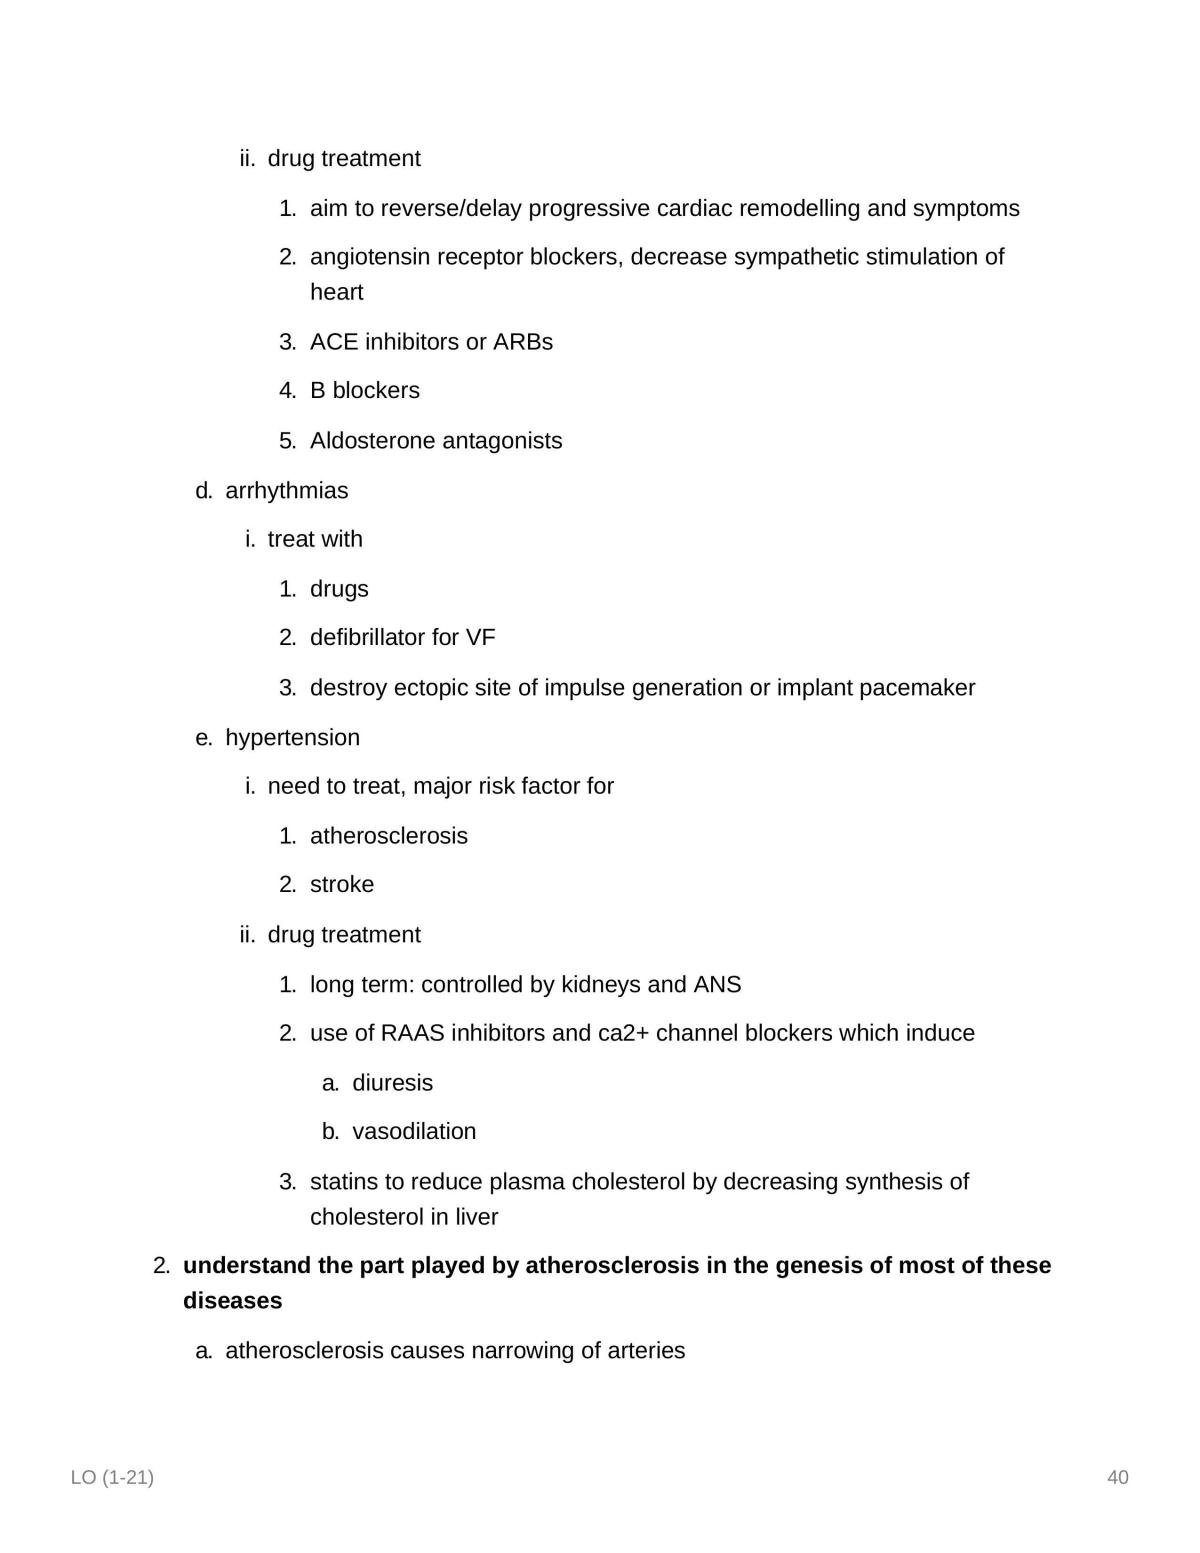 Fundamentals of Pharmacology Notes - Page 40